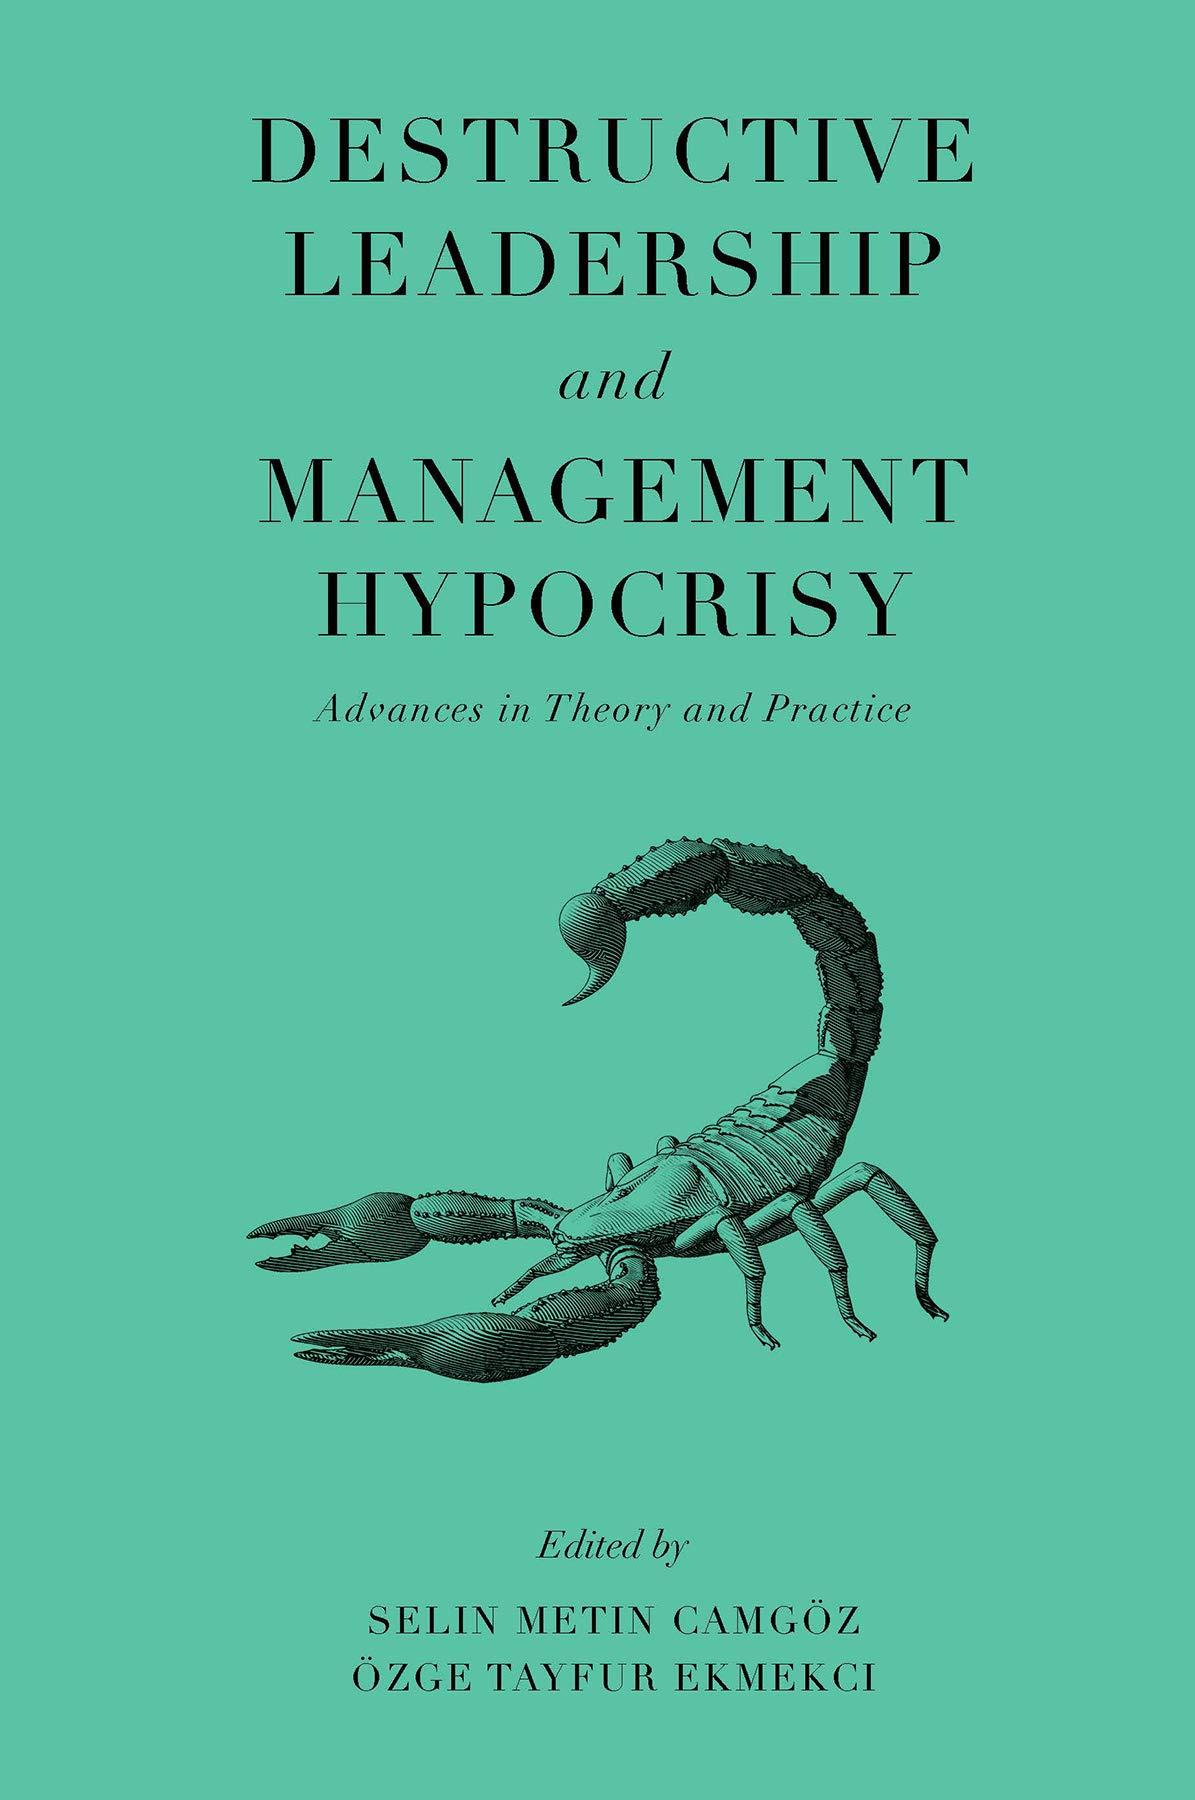 destructive leadership and management hypocrisy advances in theory and practice 1st edition selin metin